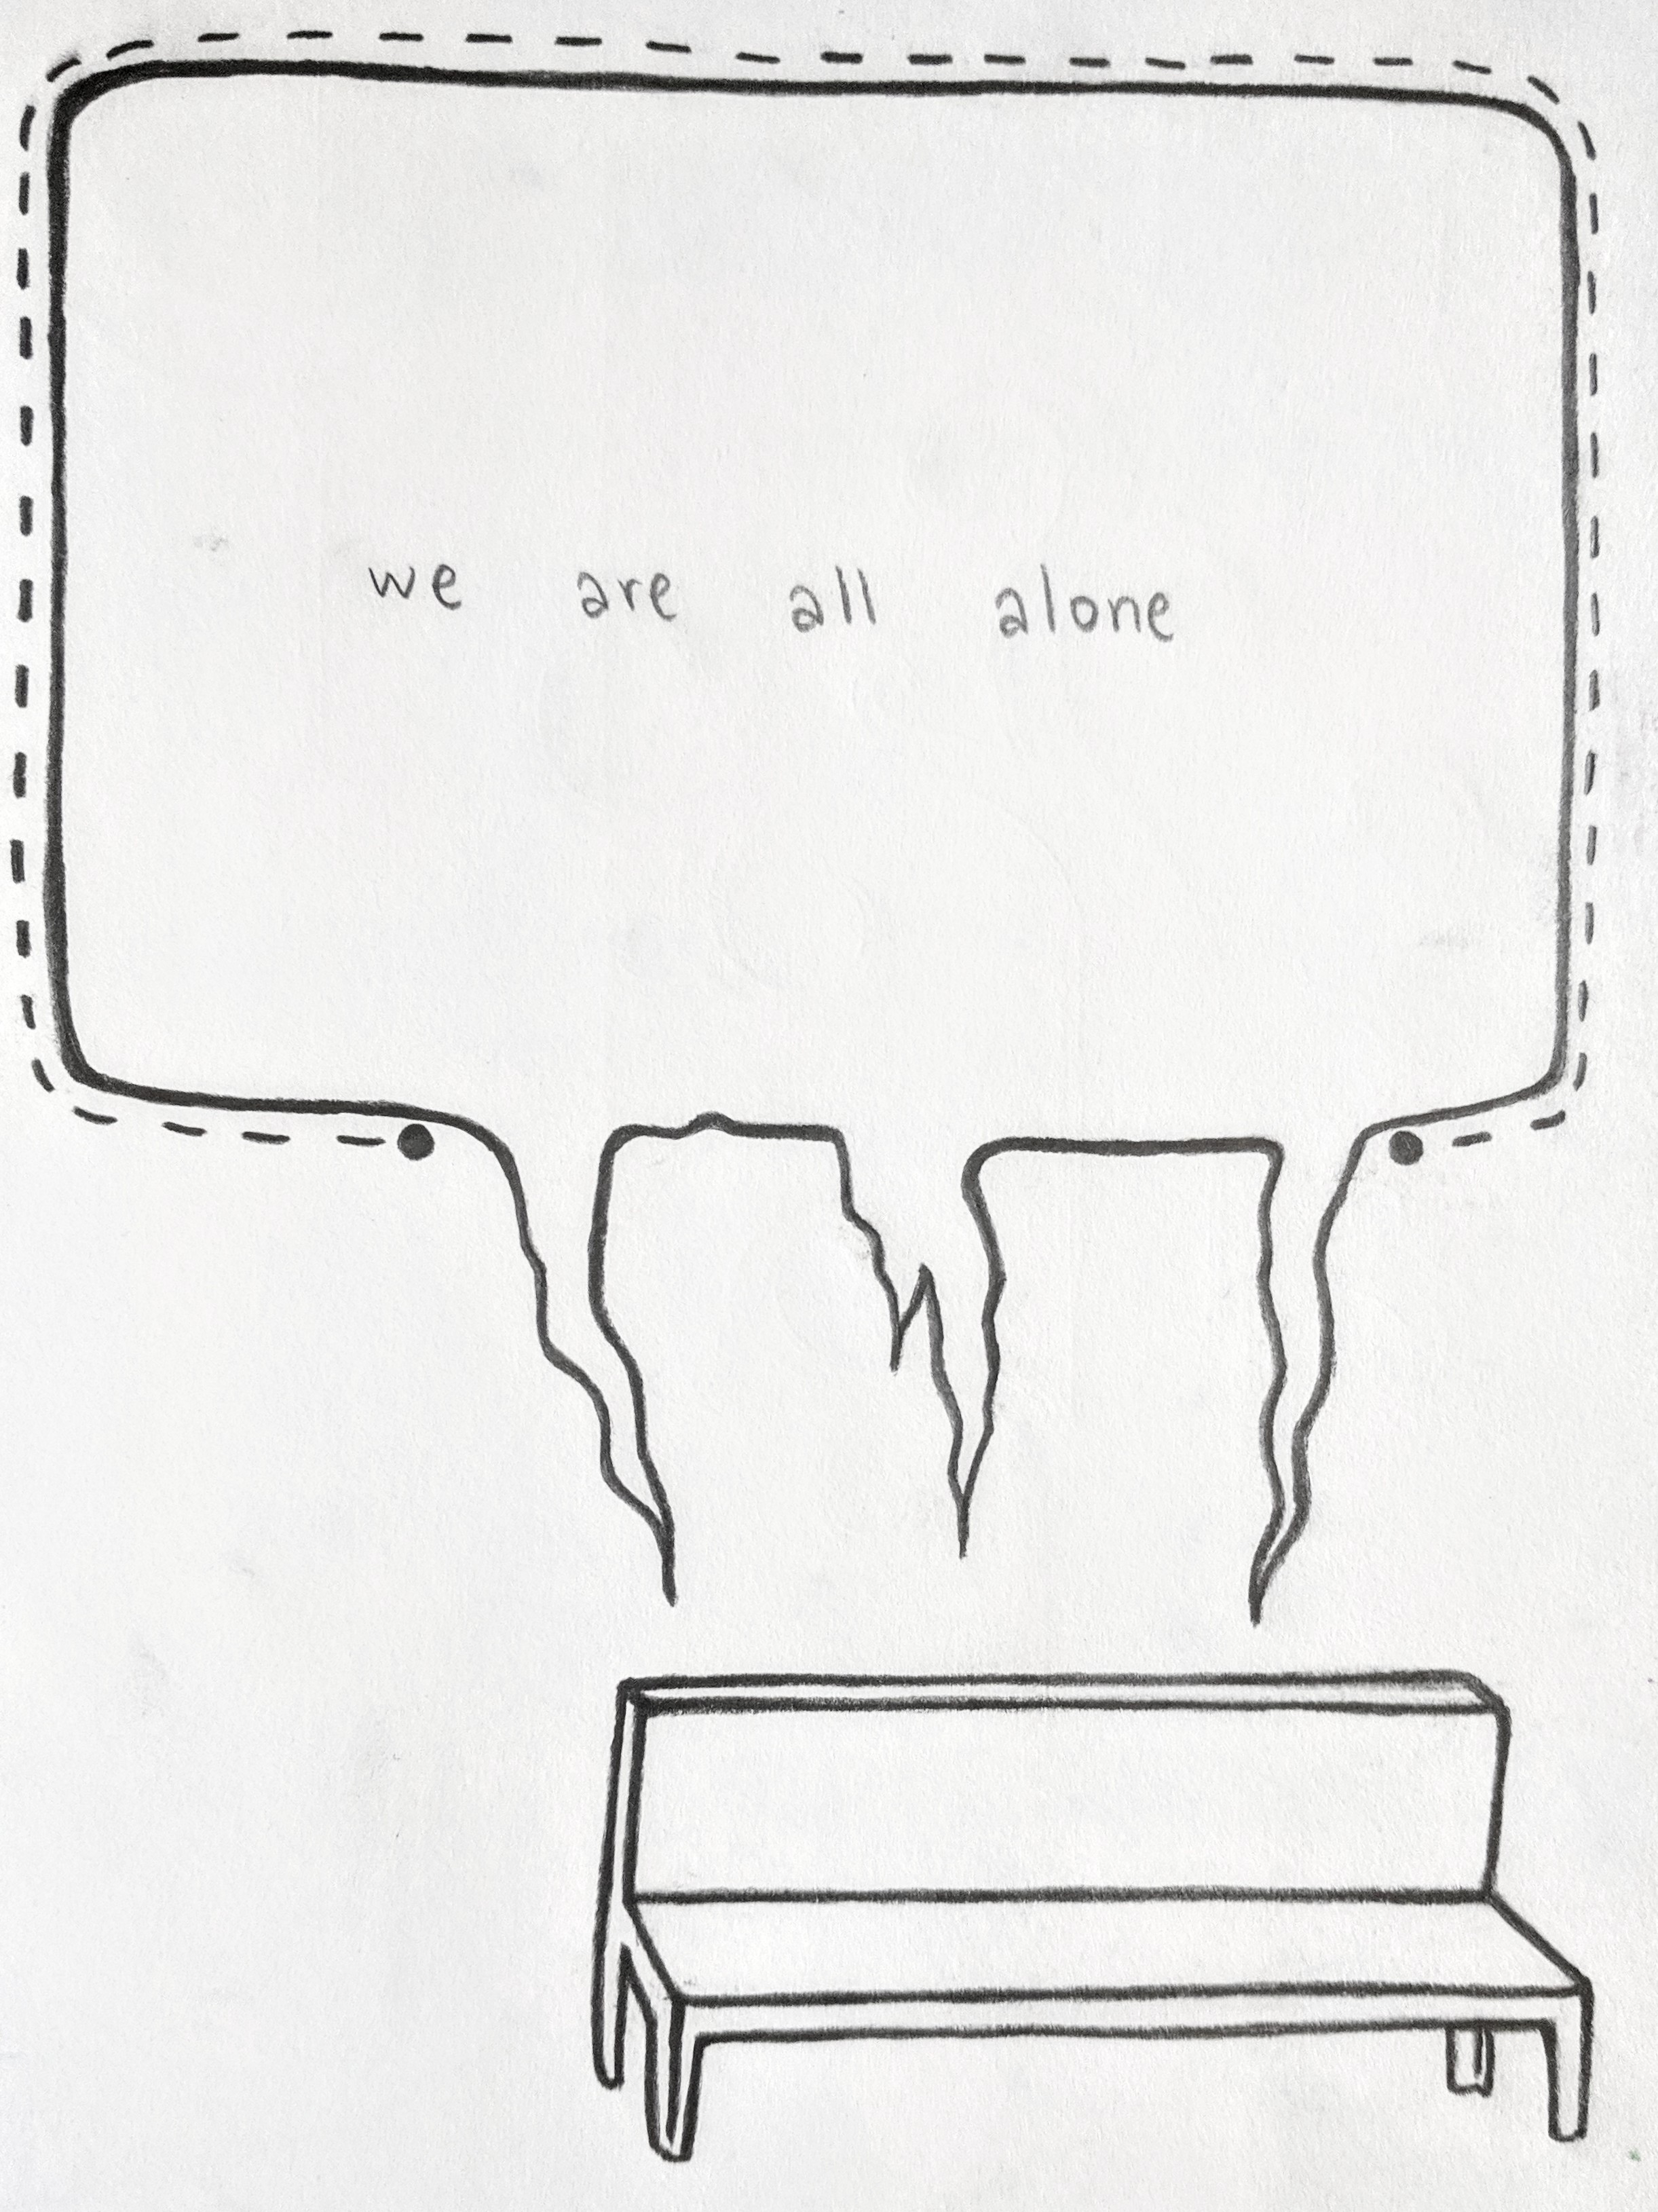 Bench saying We are all alone